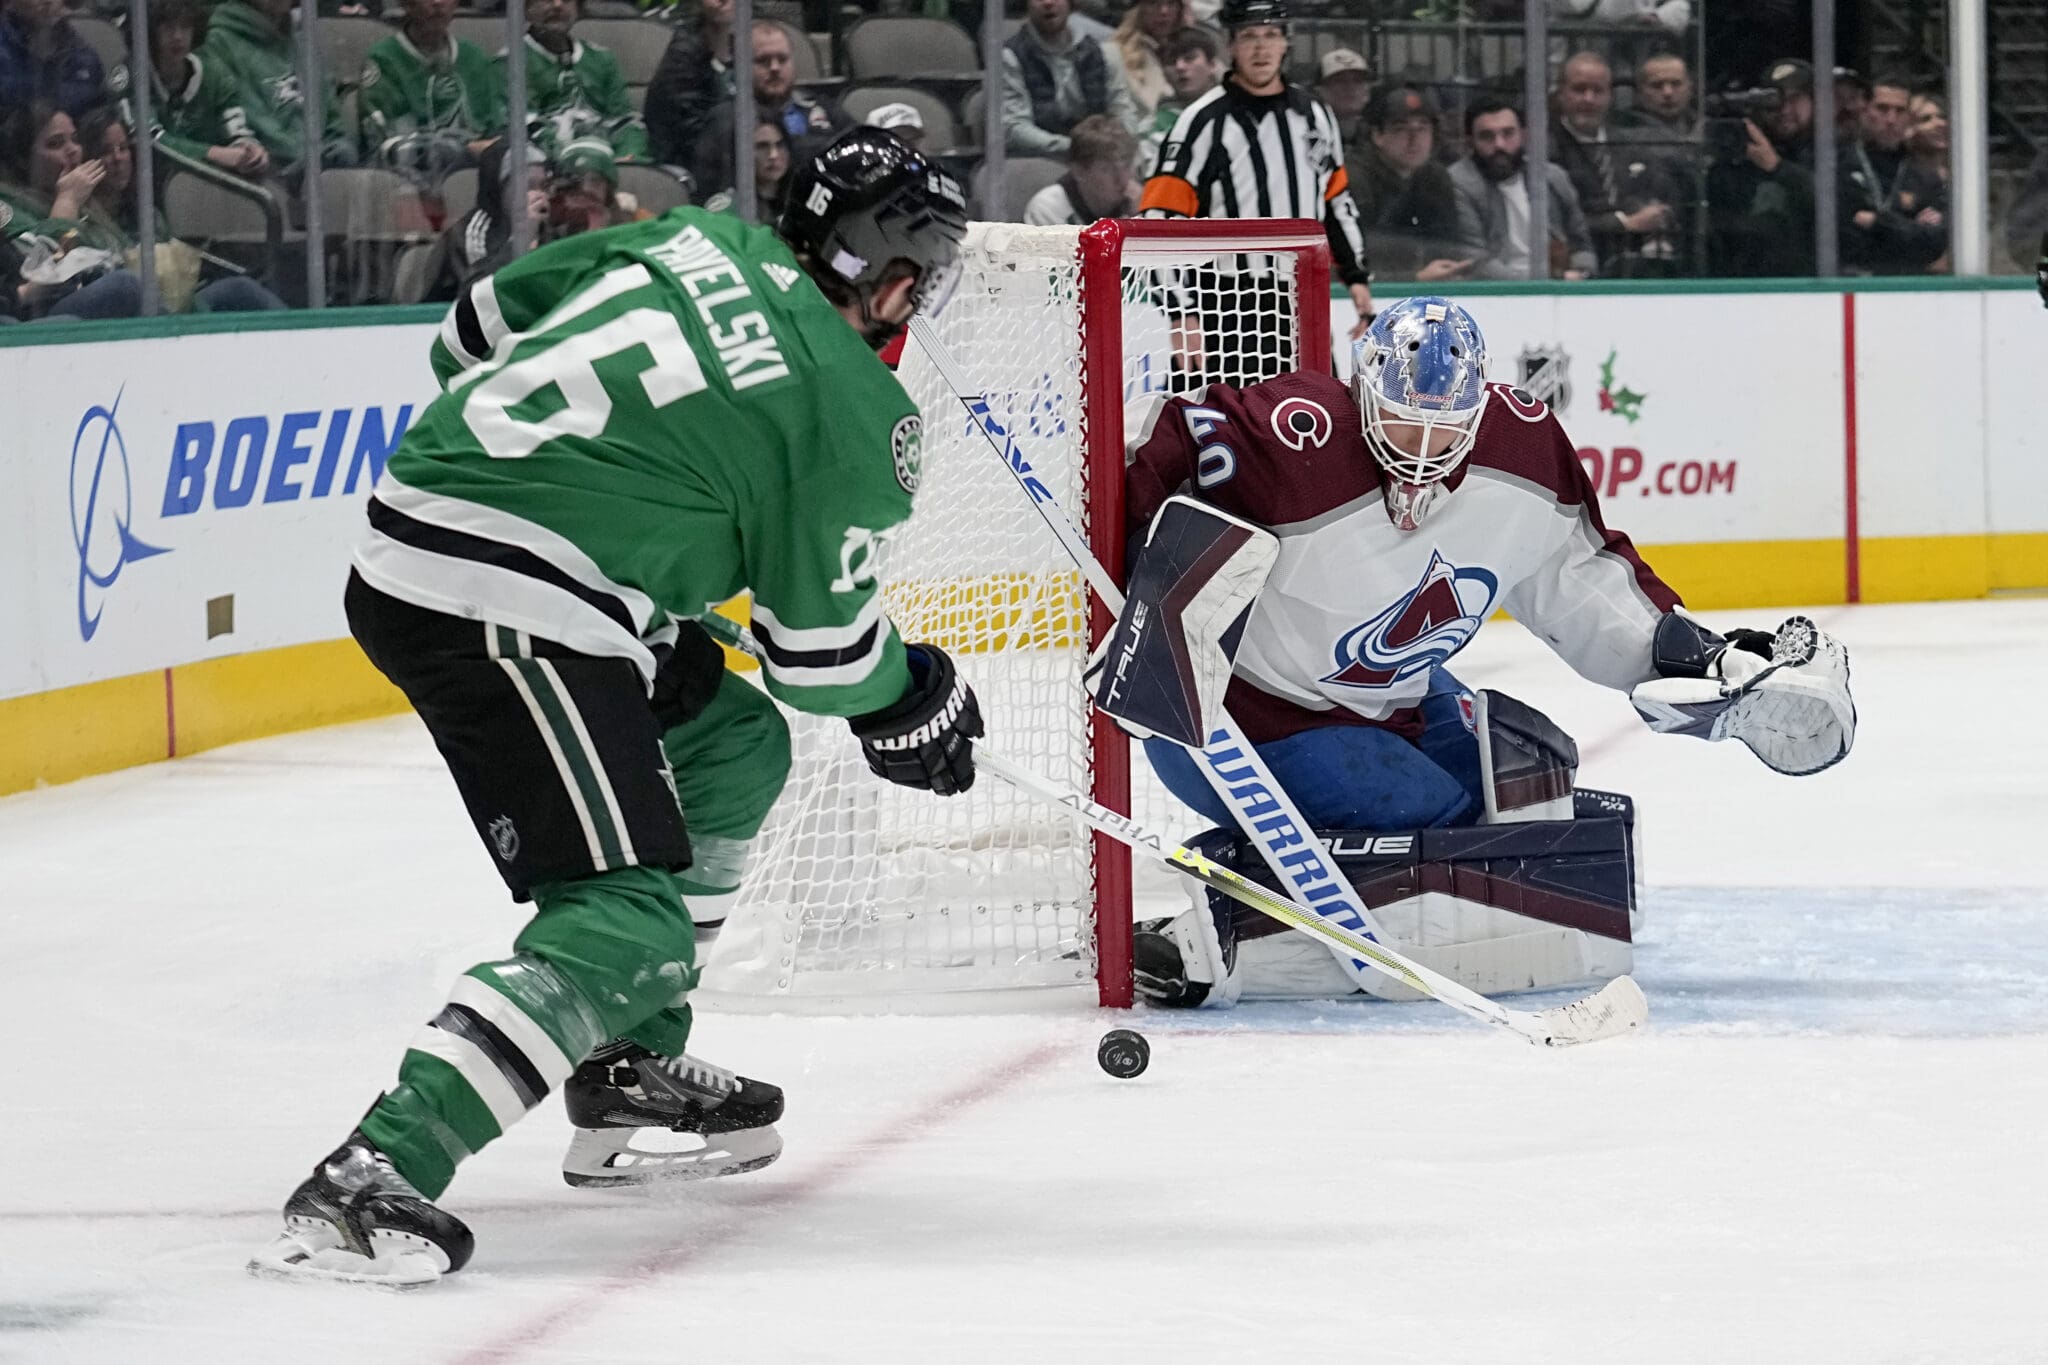 Avalanche Stars nhl central division